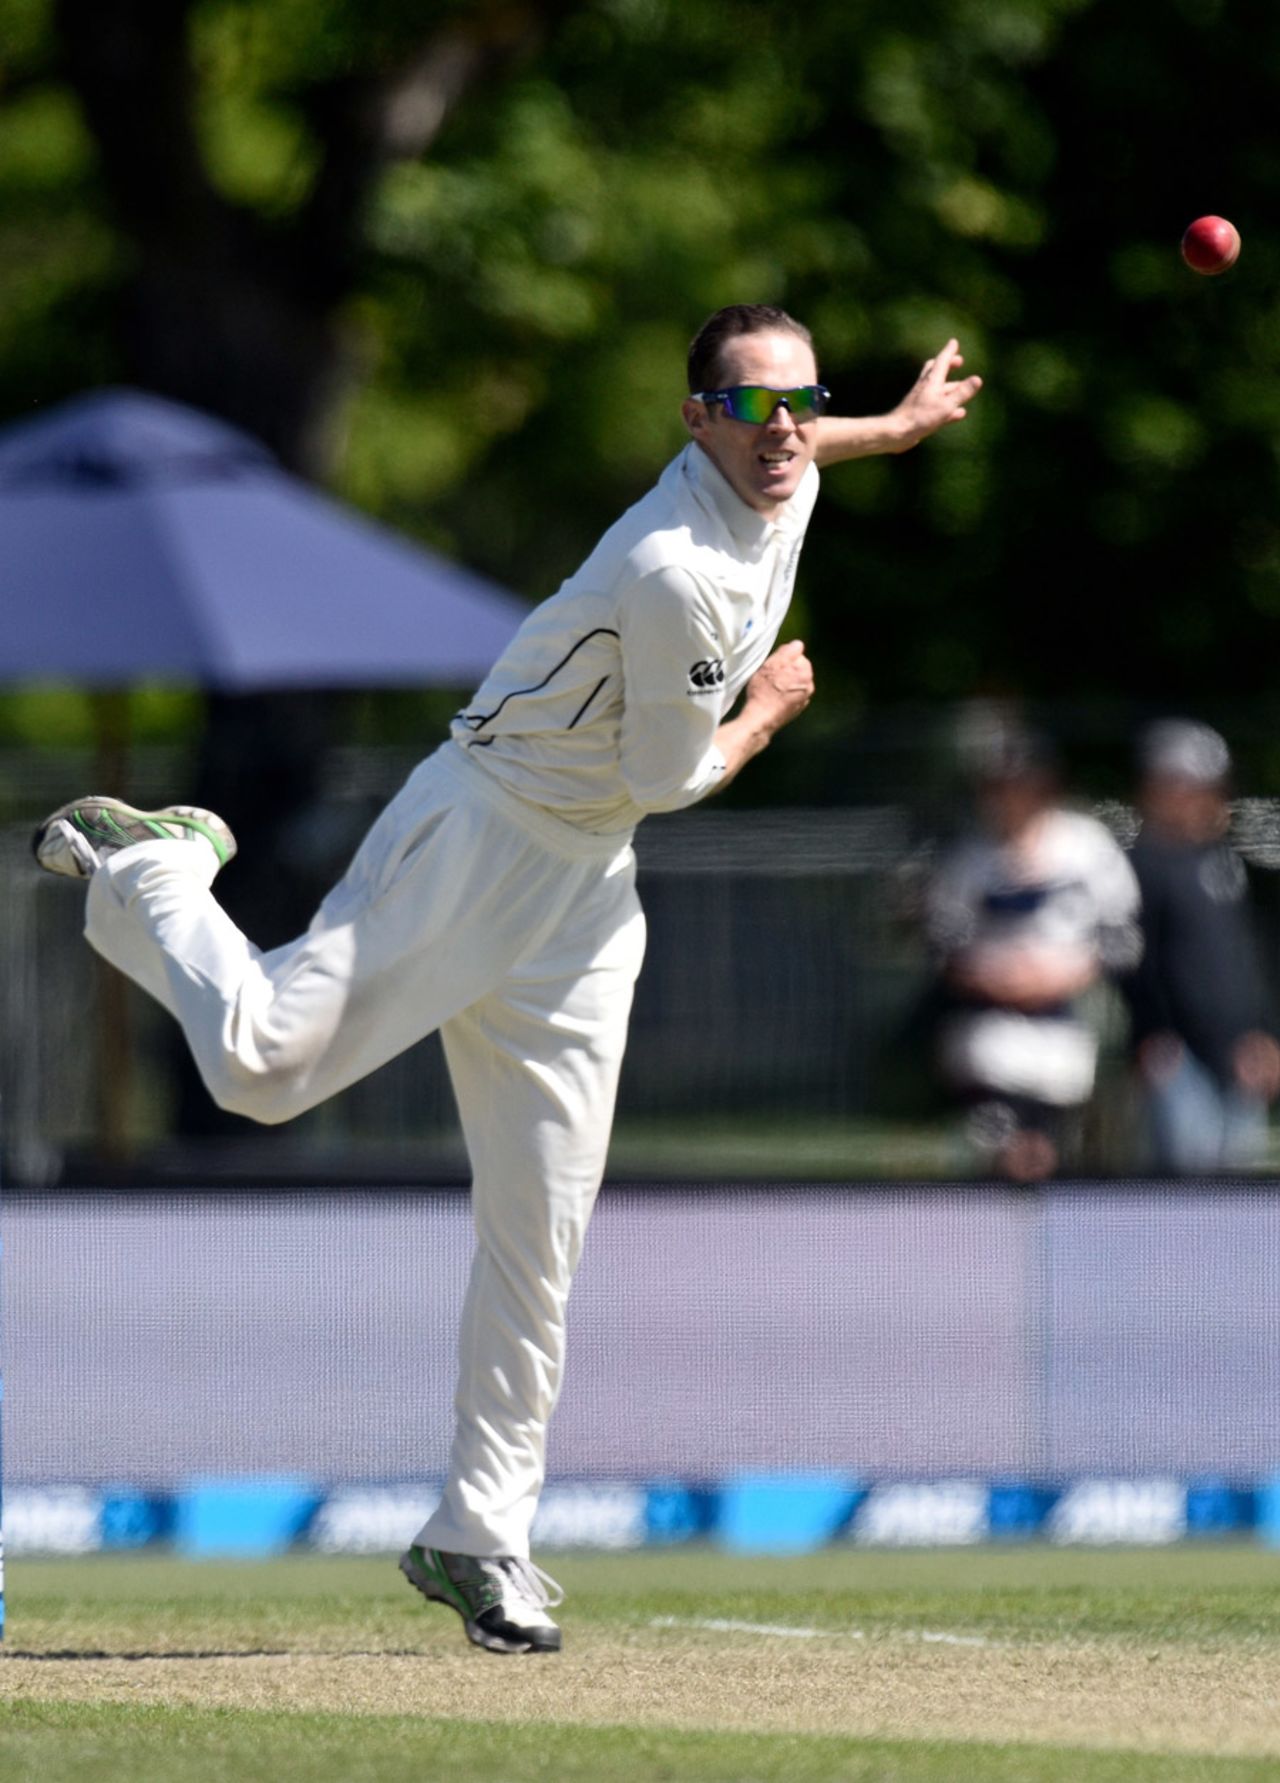 Todd Astle gets through his delivery stride, New Zealand v Pakistan, 1st Test, Christchurch, 3rd day, November 19, 2016